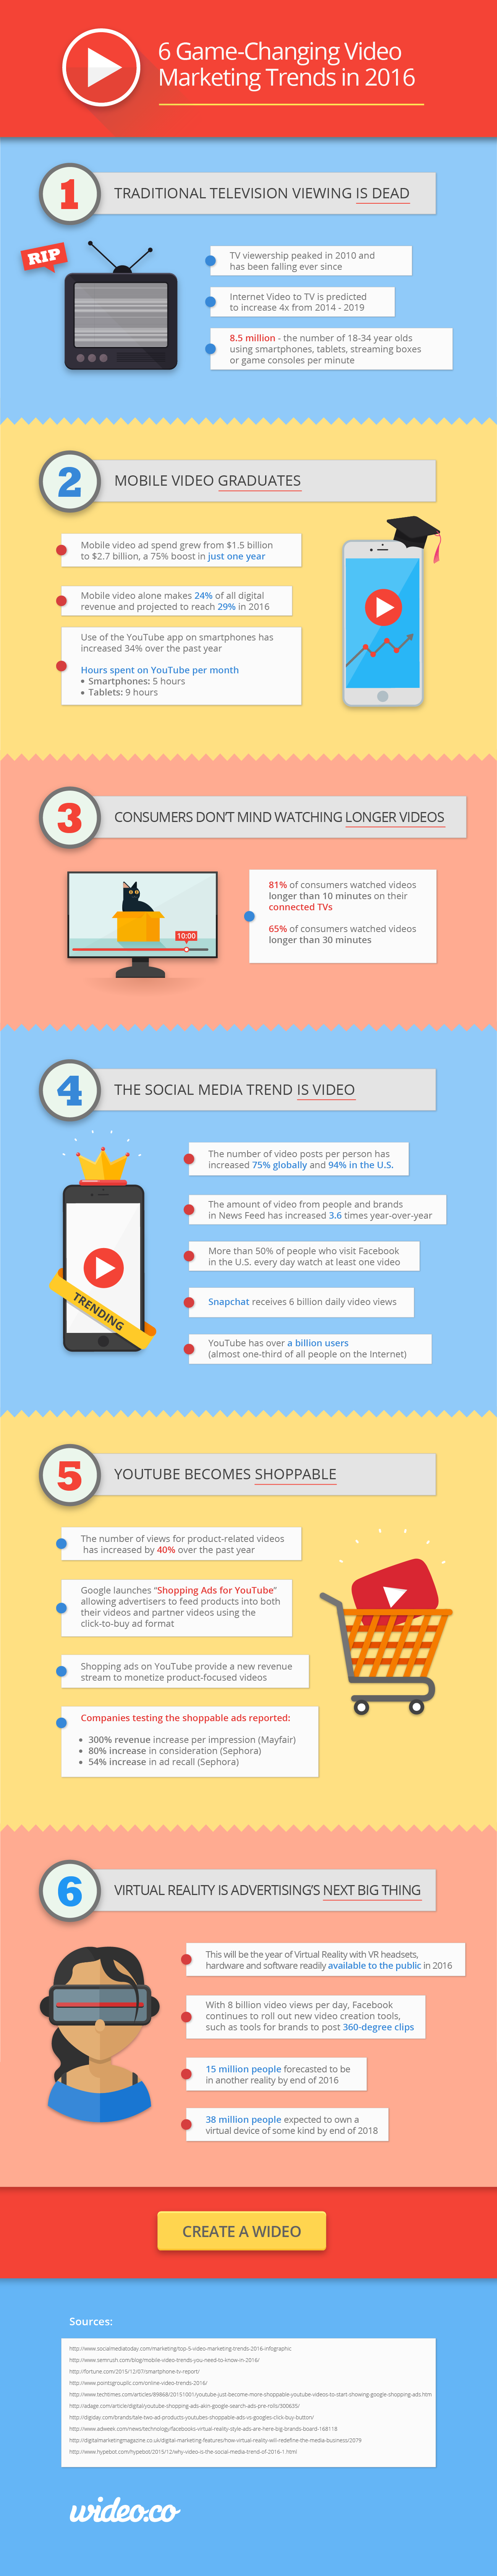 6 Game-Changing Video Marketing Trends in 2016